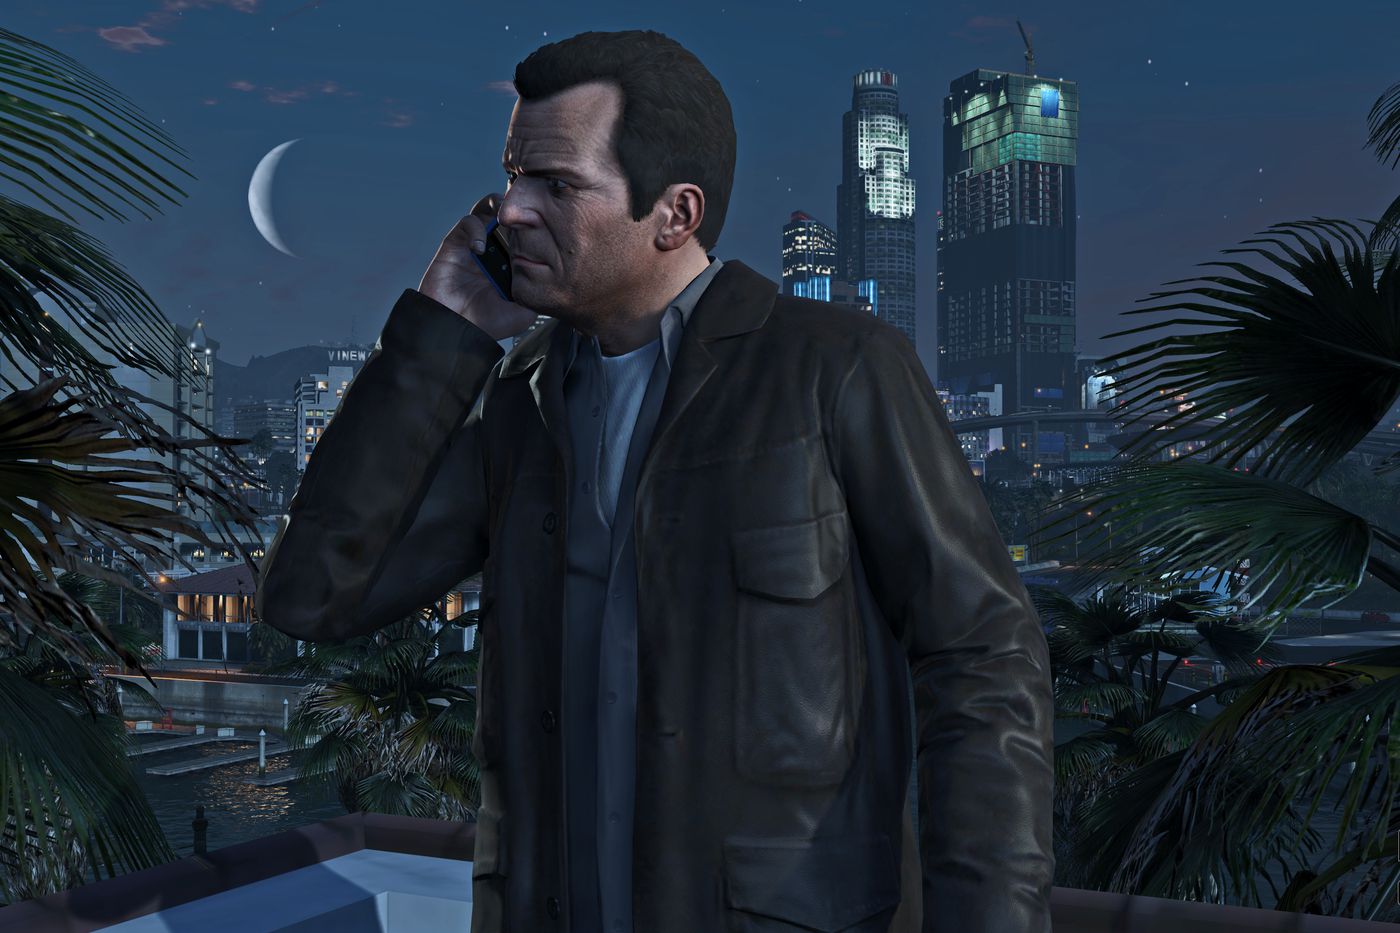 Grand Theft Auto 5 is coming to the PS5 and Xbox Series X in November